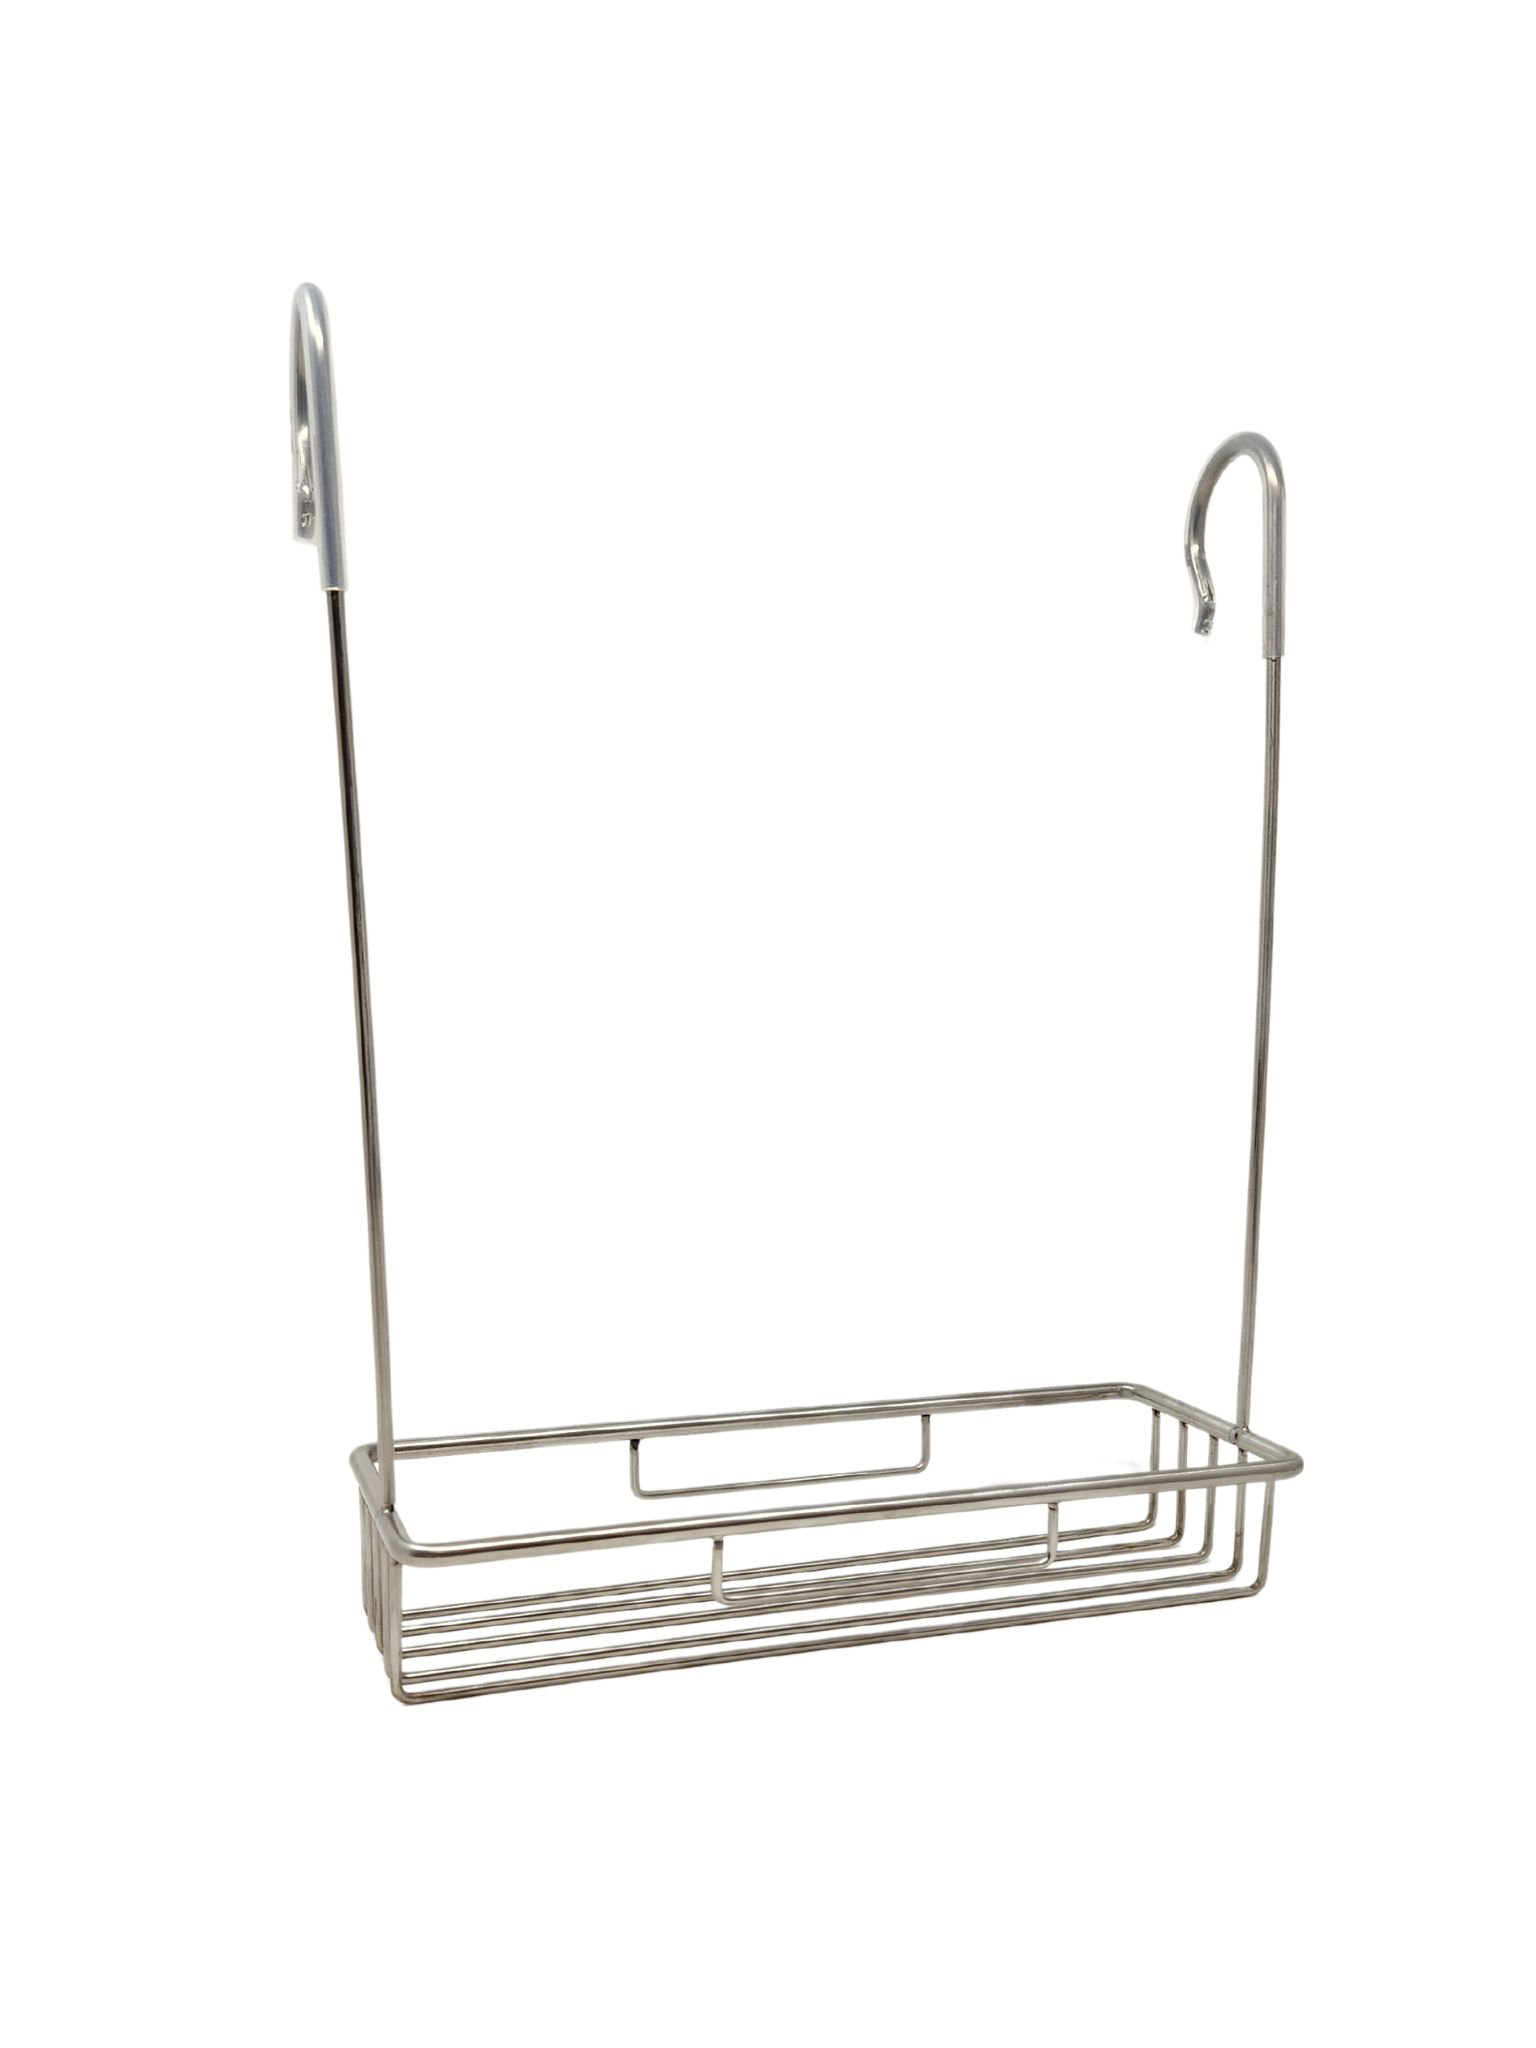 Large Satin Stainless Universal Wire Accessory Tray for 1.25 Diameter Grab Bar Rebrilliant Finish: Satin Stainless